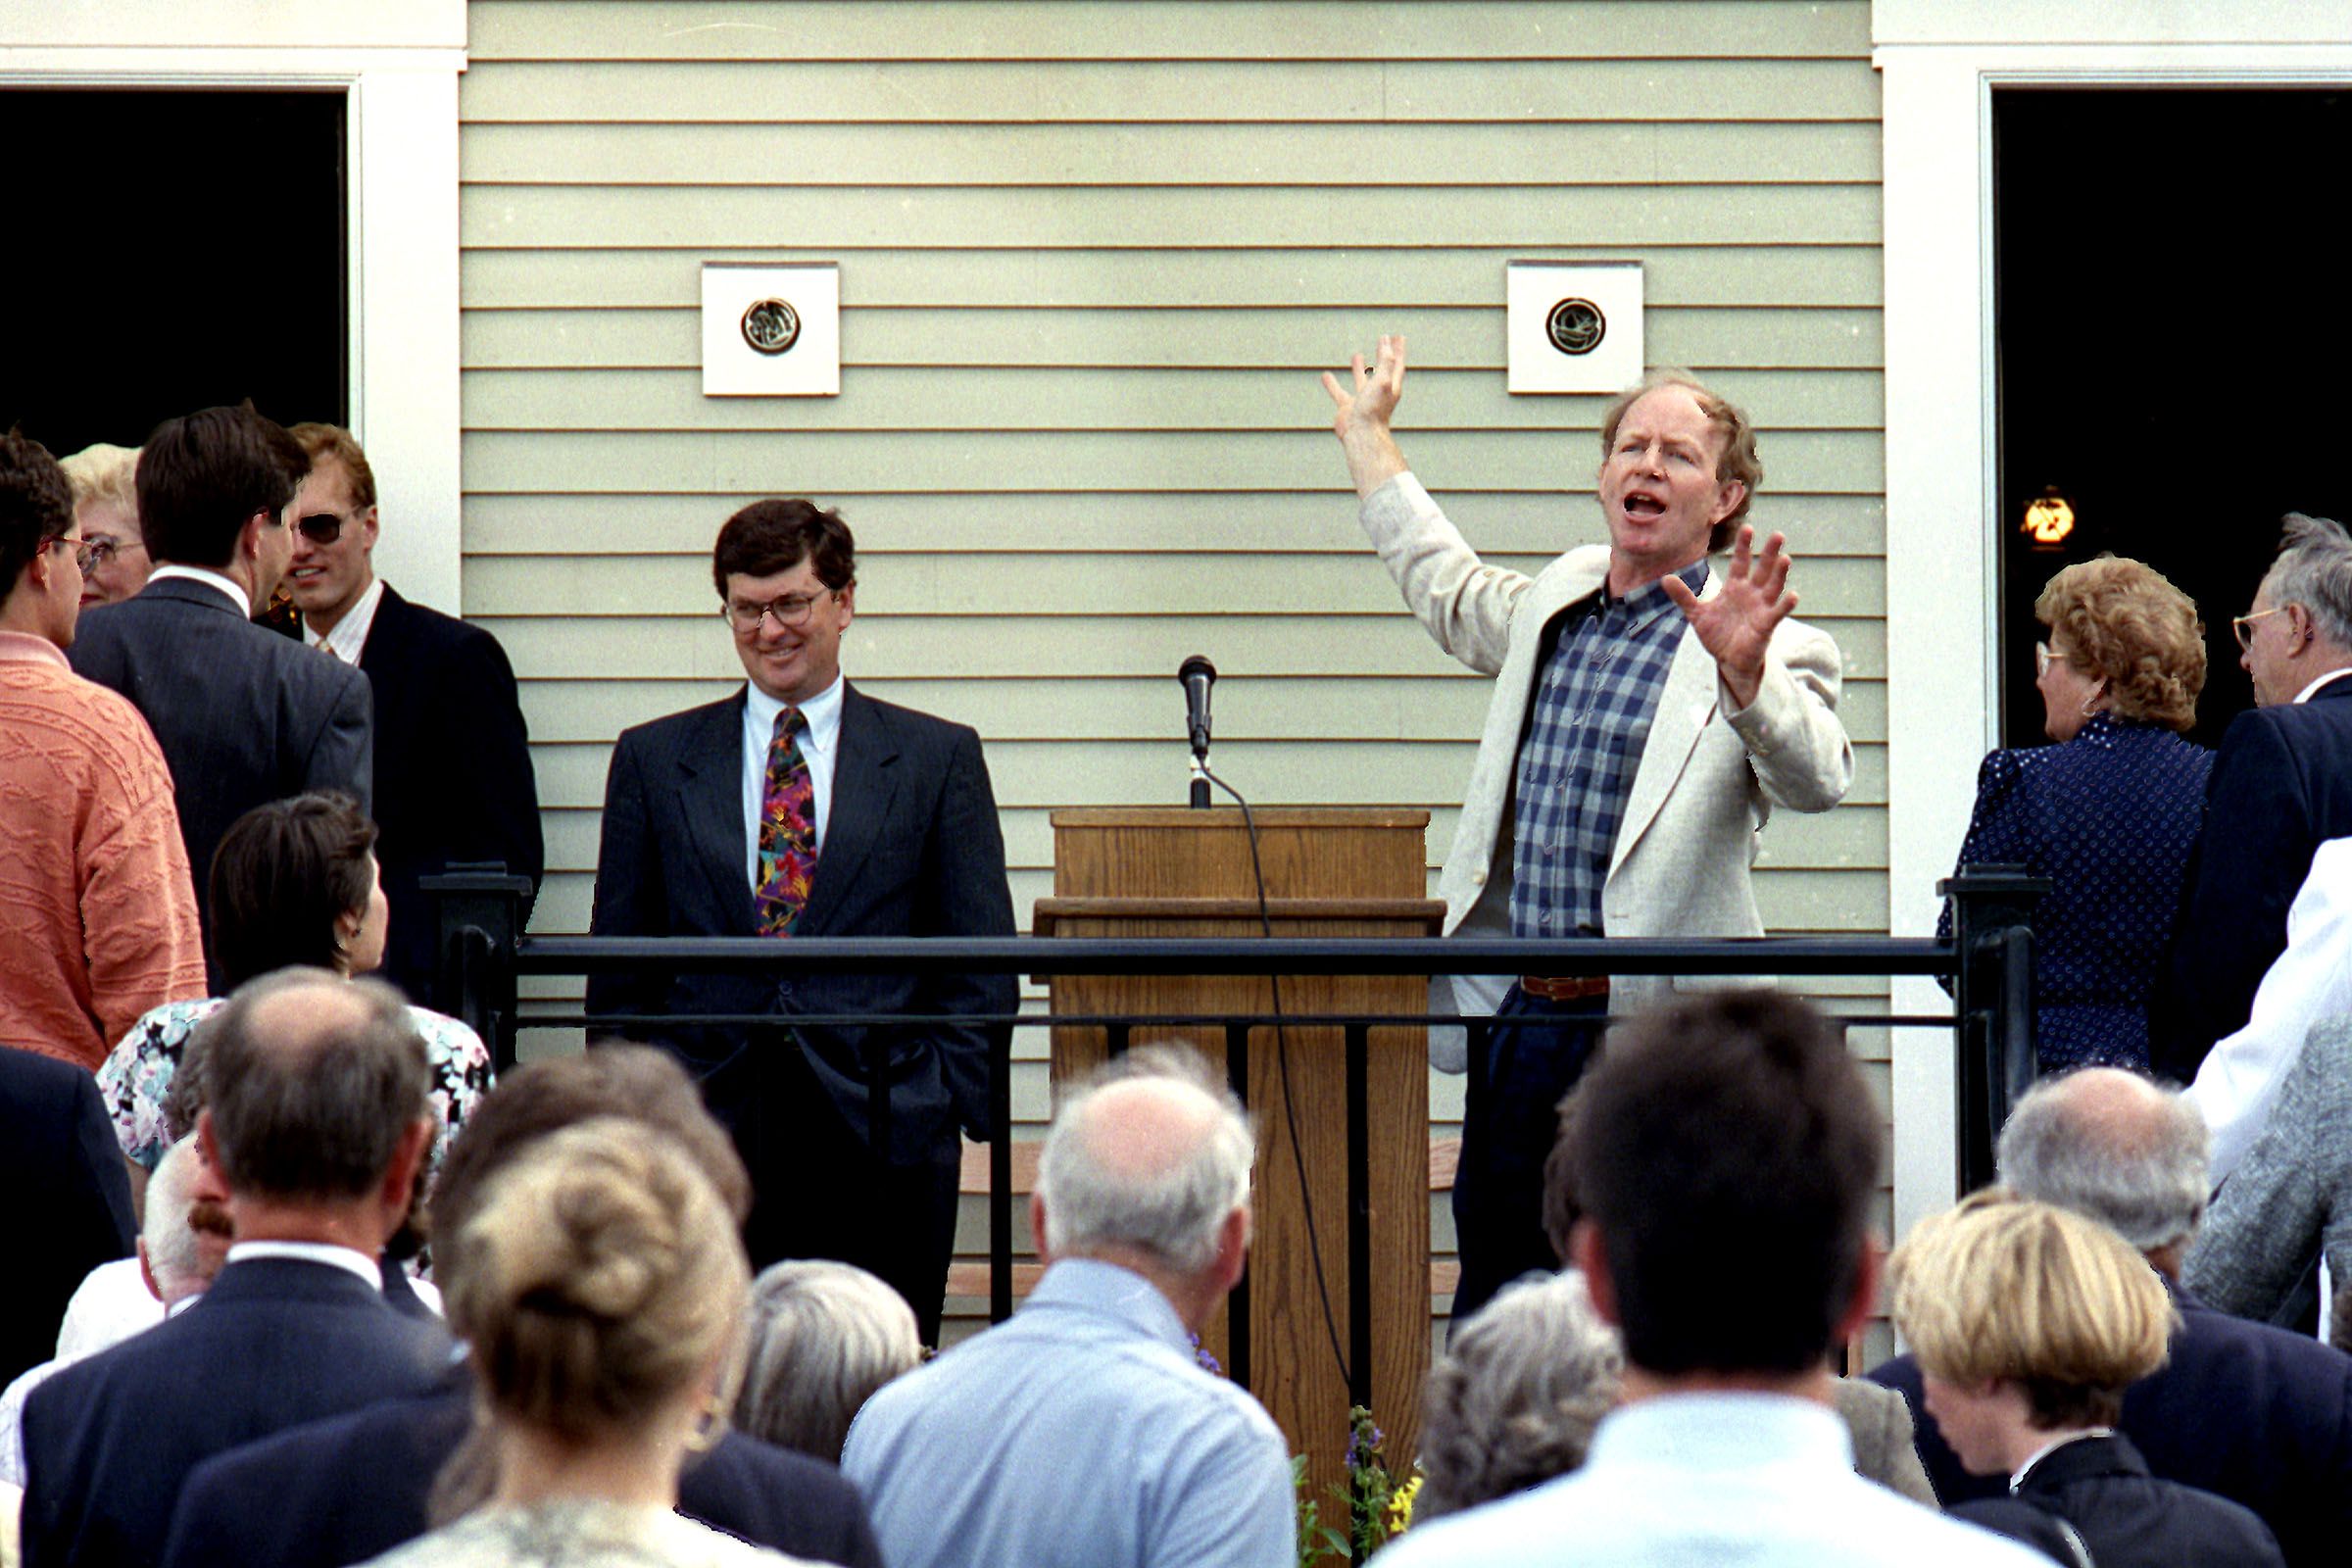 Simon Pearce talks to people gathered on June 3, 1993, for the opening of his new plant in Windsor, Vt. "The truth is," said Gov. Howard Dean at the event, "this economy isn't going to recover until the Simon Pearces of this world" begin to follow what has already been done in Windsor. (Valley News - Robert Pope) Copyright Valley News. May not be reprinted or used online without permission. Send requests to permission@vnews.com.